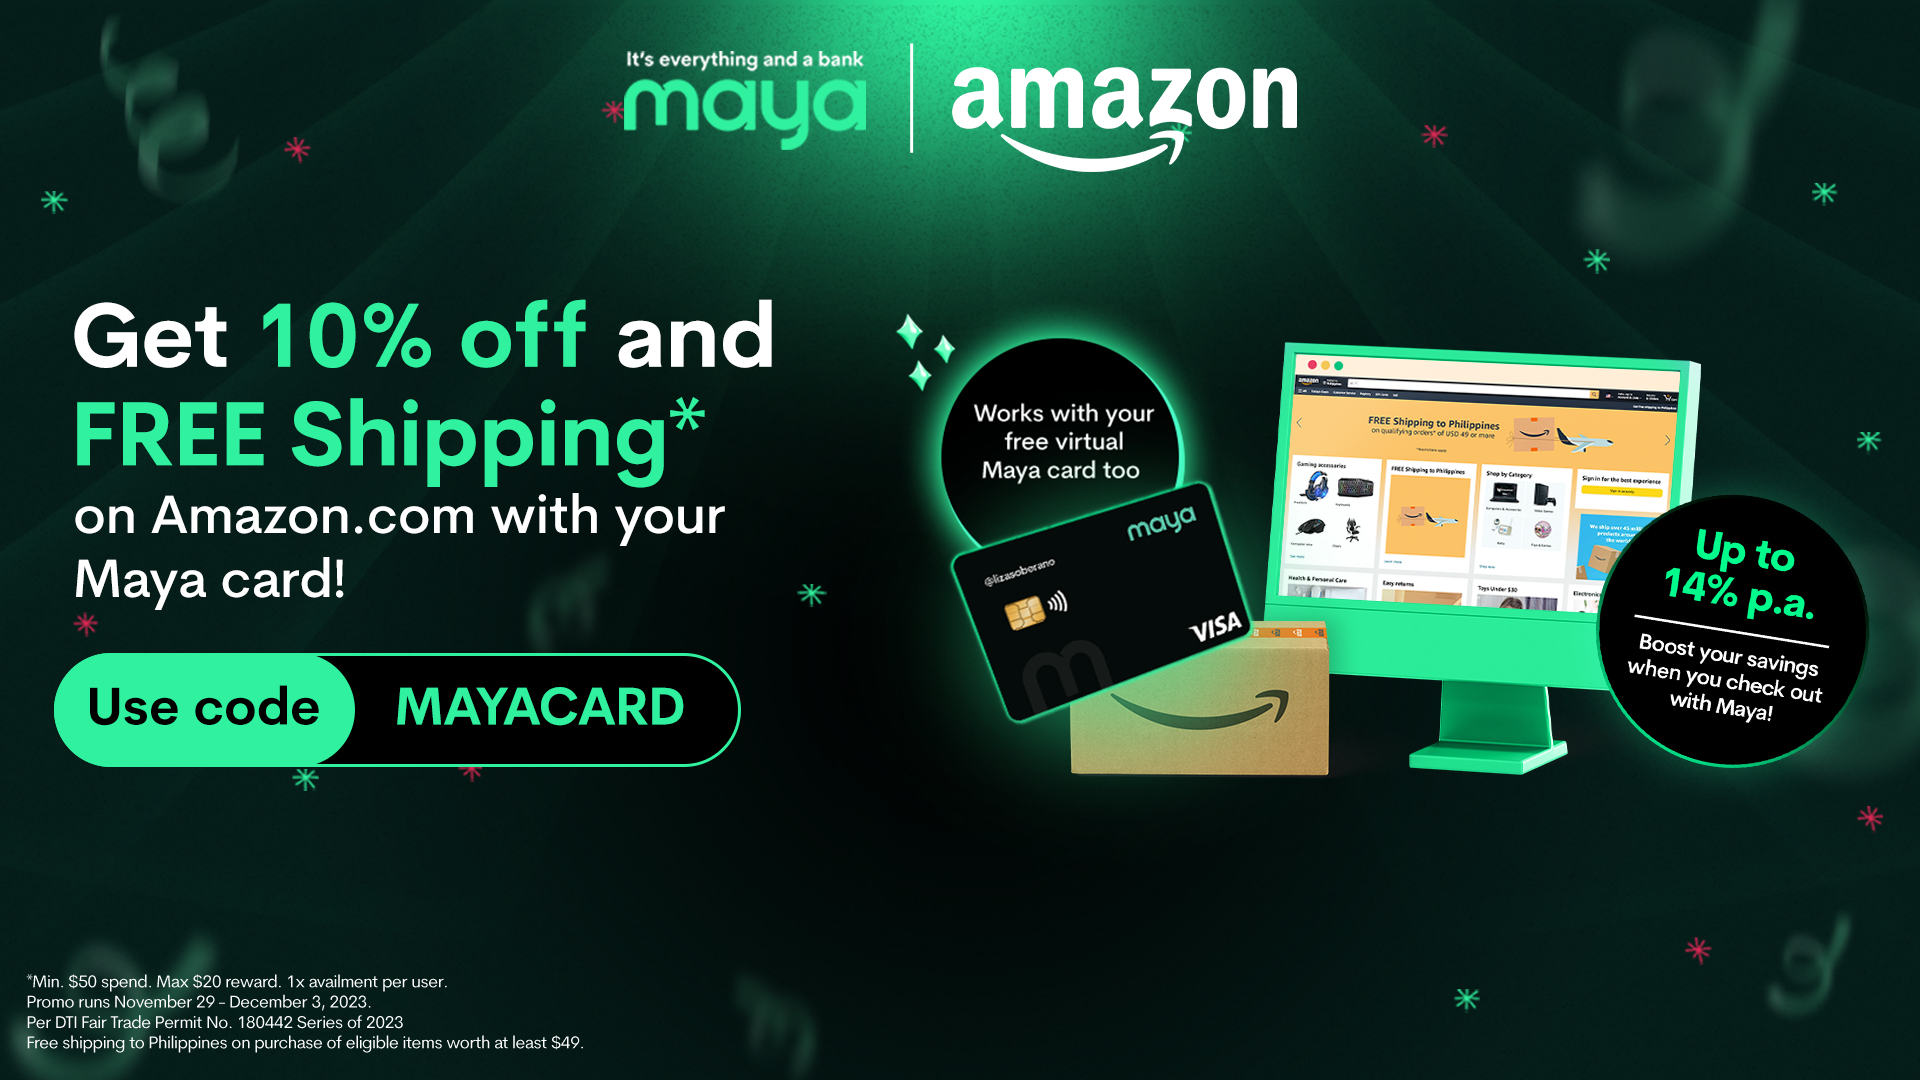 10% OFF + FREE SHIPPING at Amazon.com with your Maya Card!